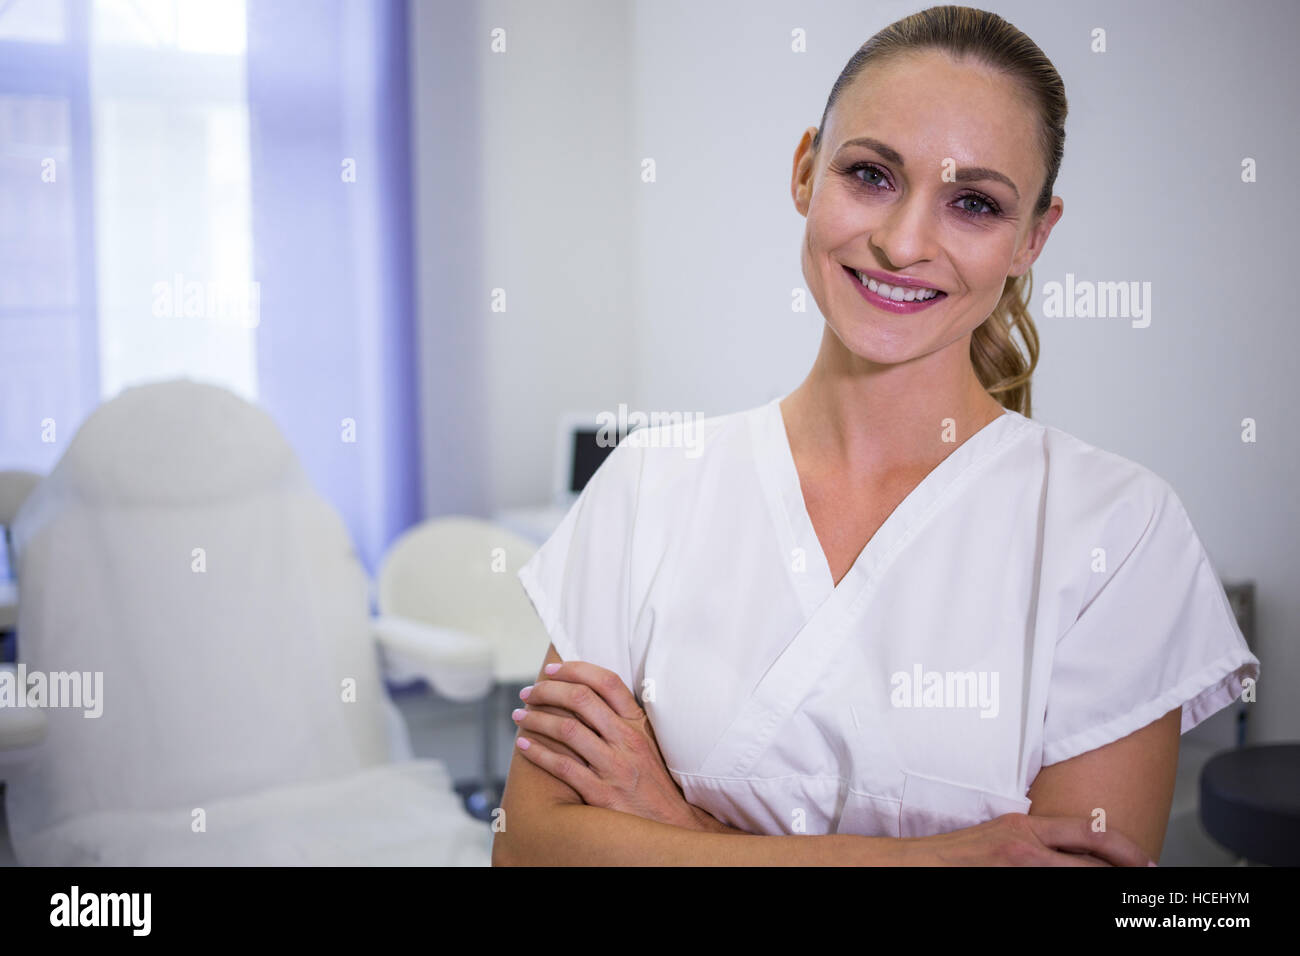 Portrait of dentist standing with arms crossed Stock Photo